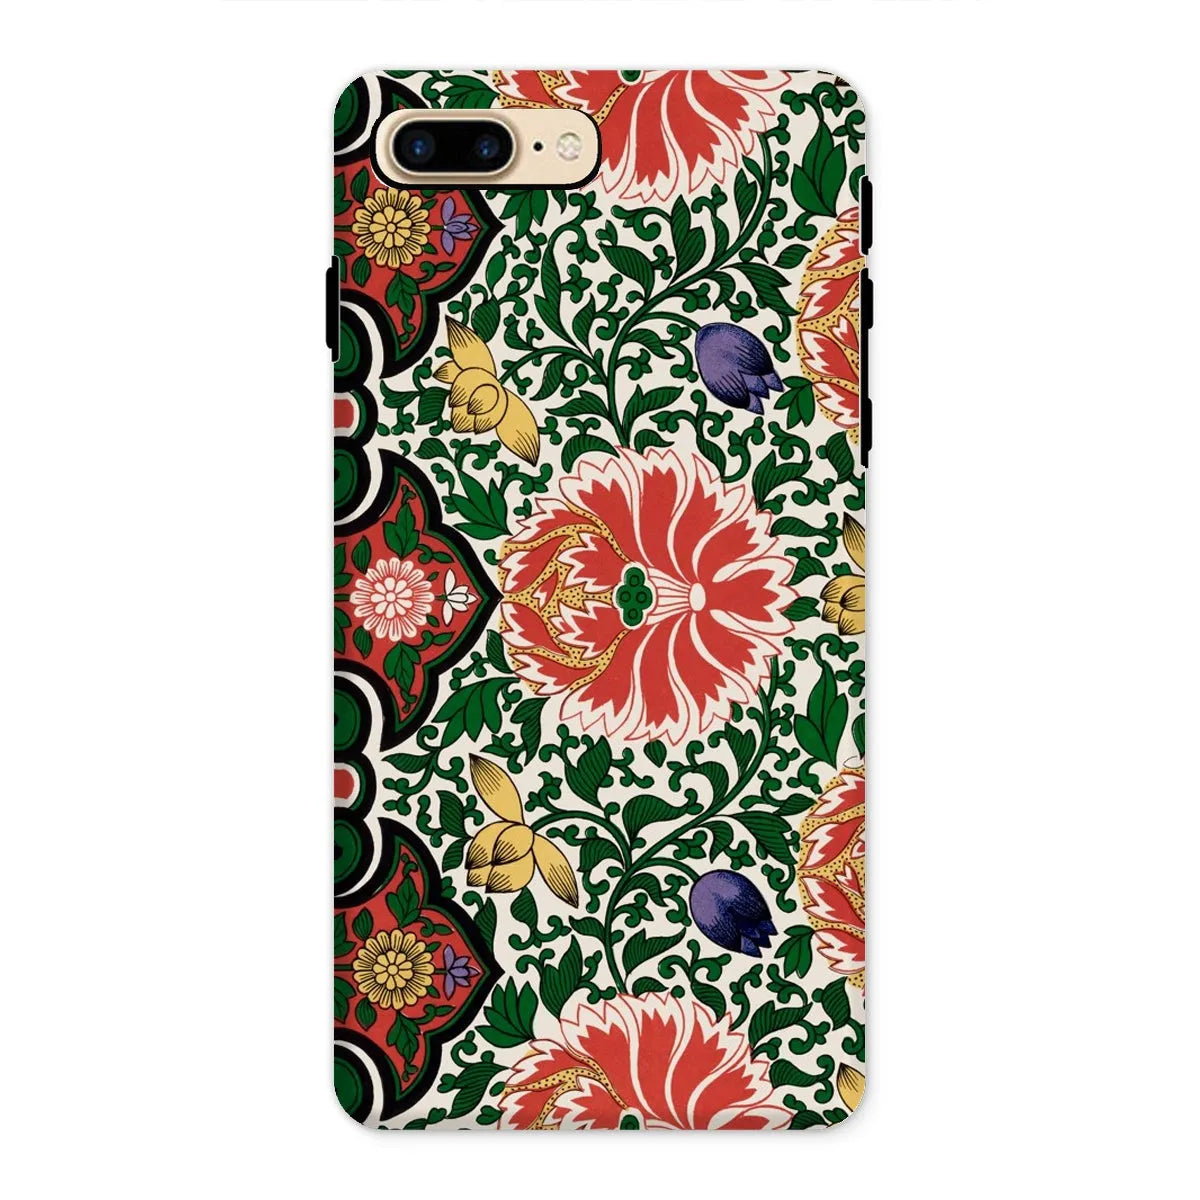 Chinese Floral Pattern Aesthetic Art Phone Case - Owen Jones - Iphone 8 Plus / Matte - Mobile Phone Cases - Aesthetic